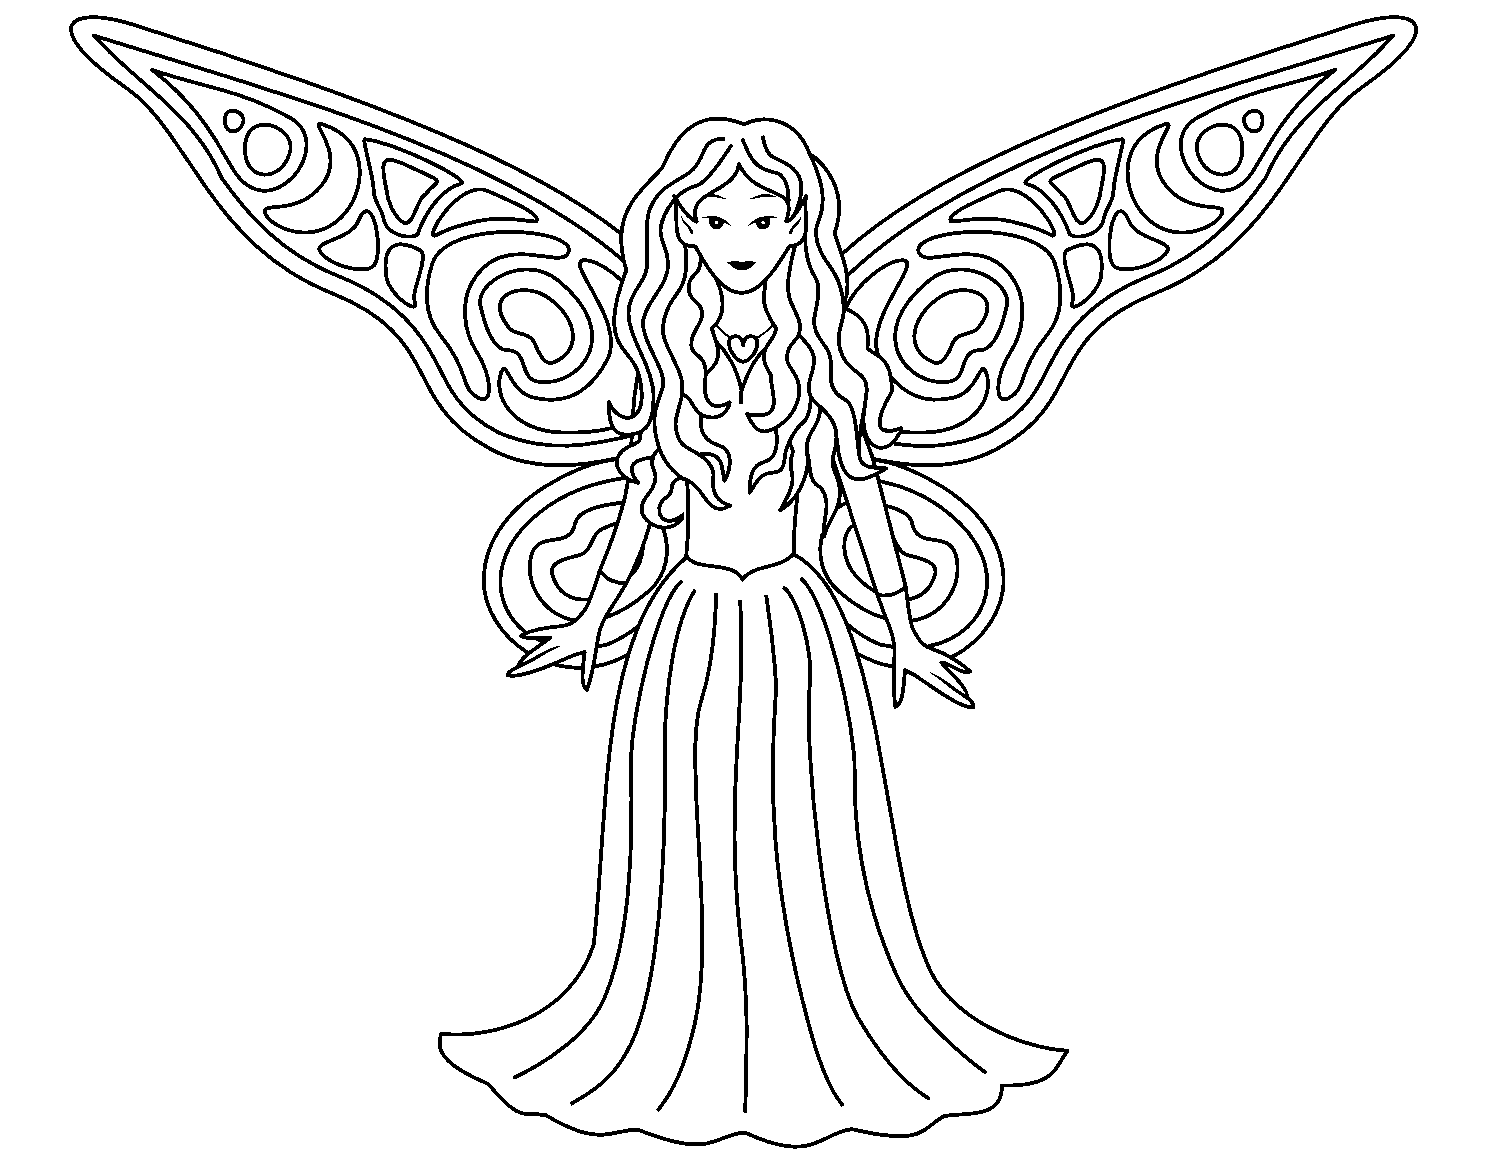 Fairy Pictures To Color - Coloring Pages for Kids and for Adults